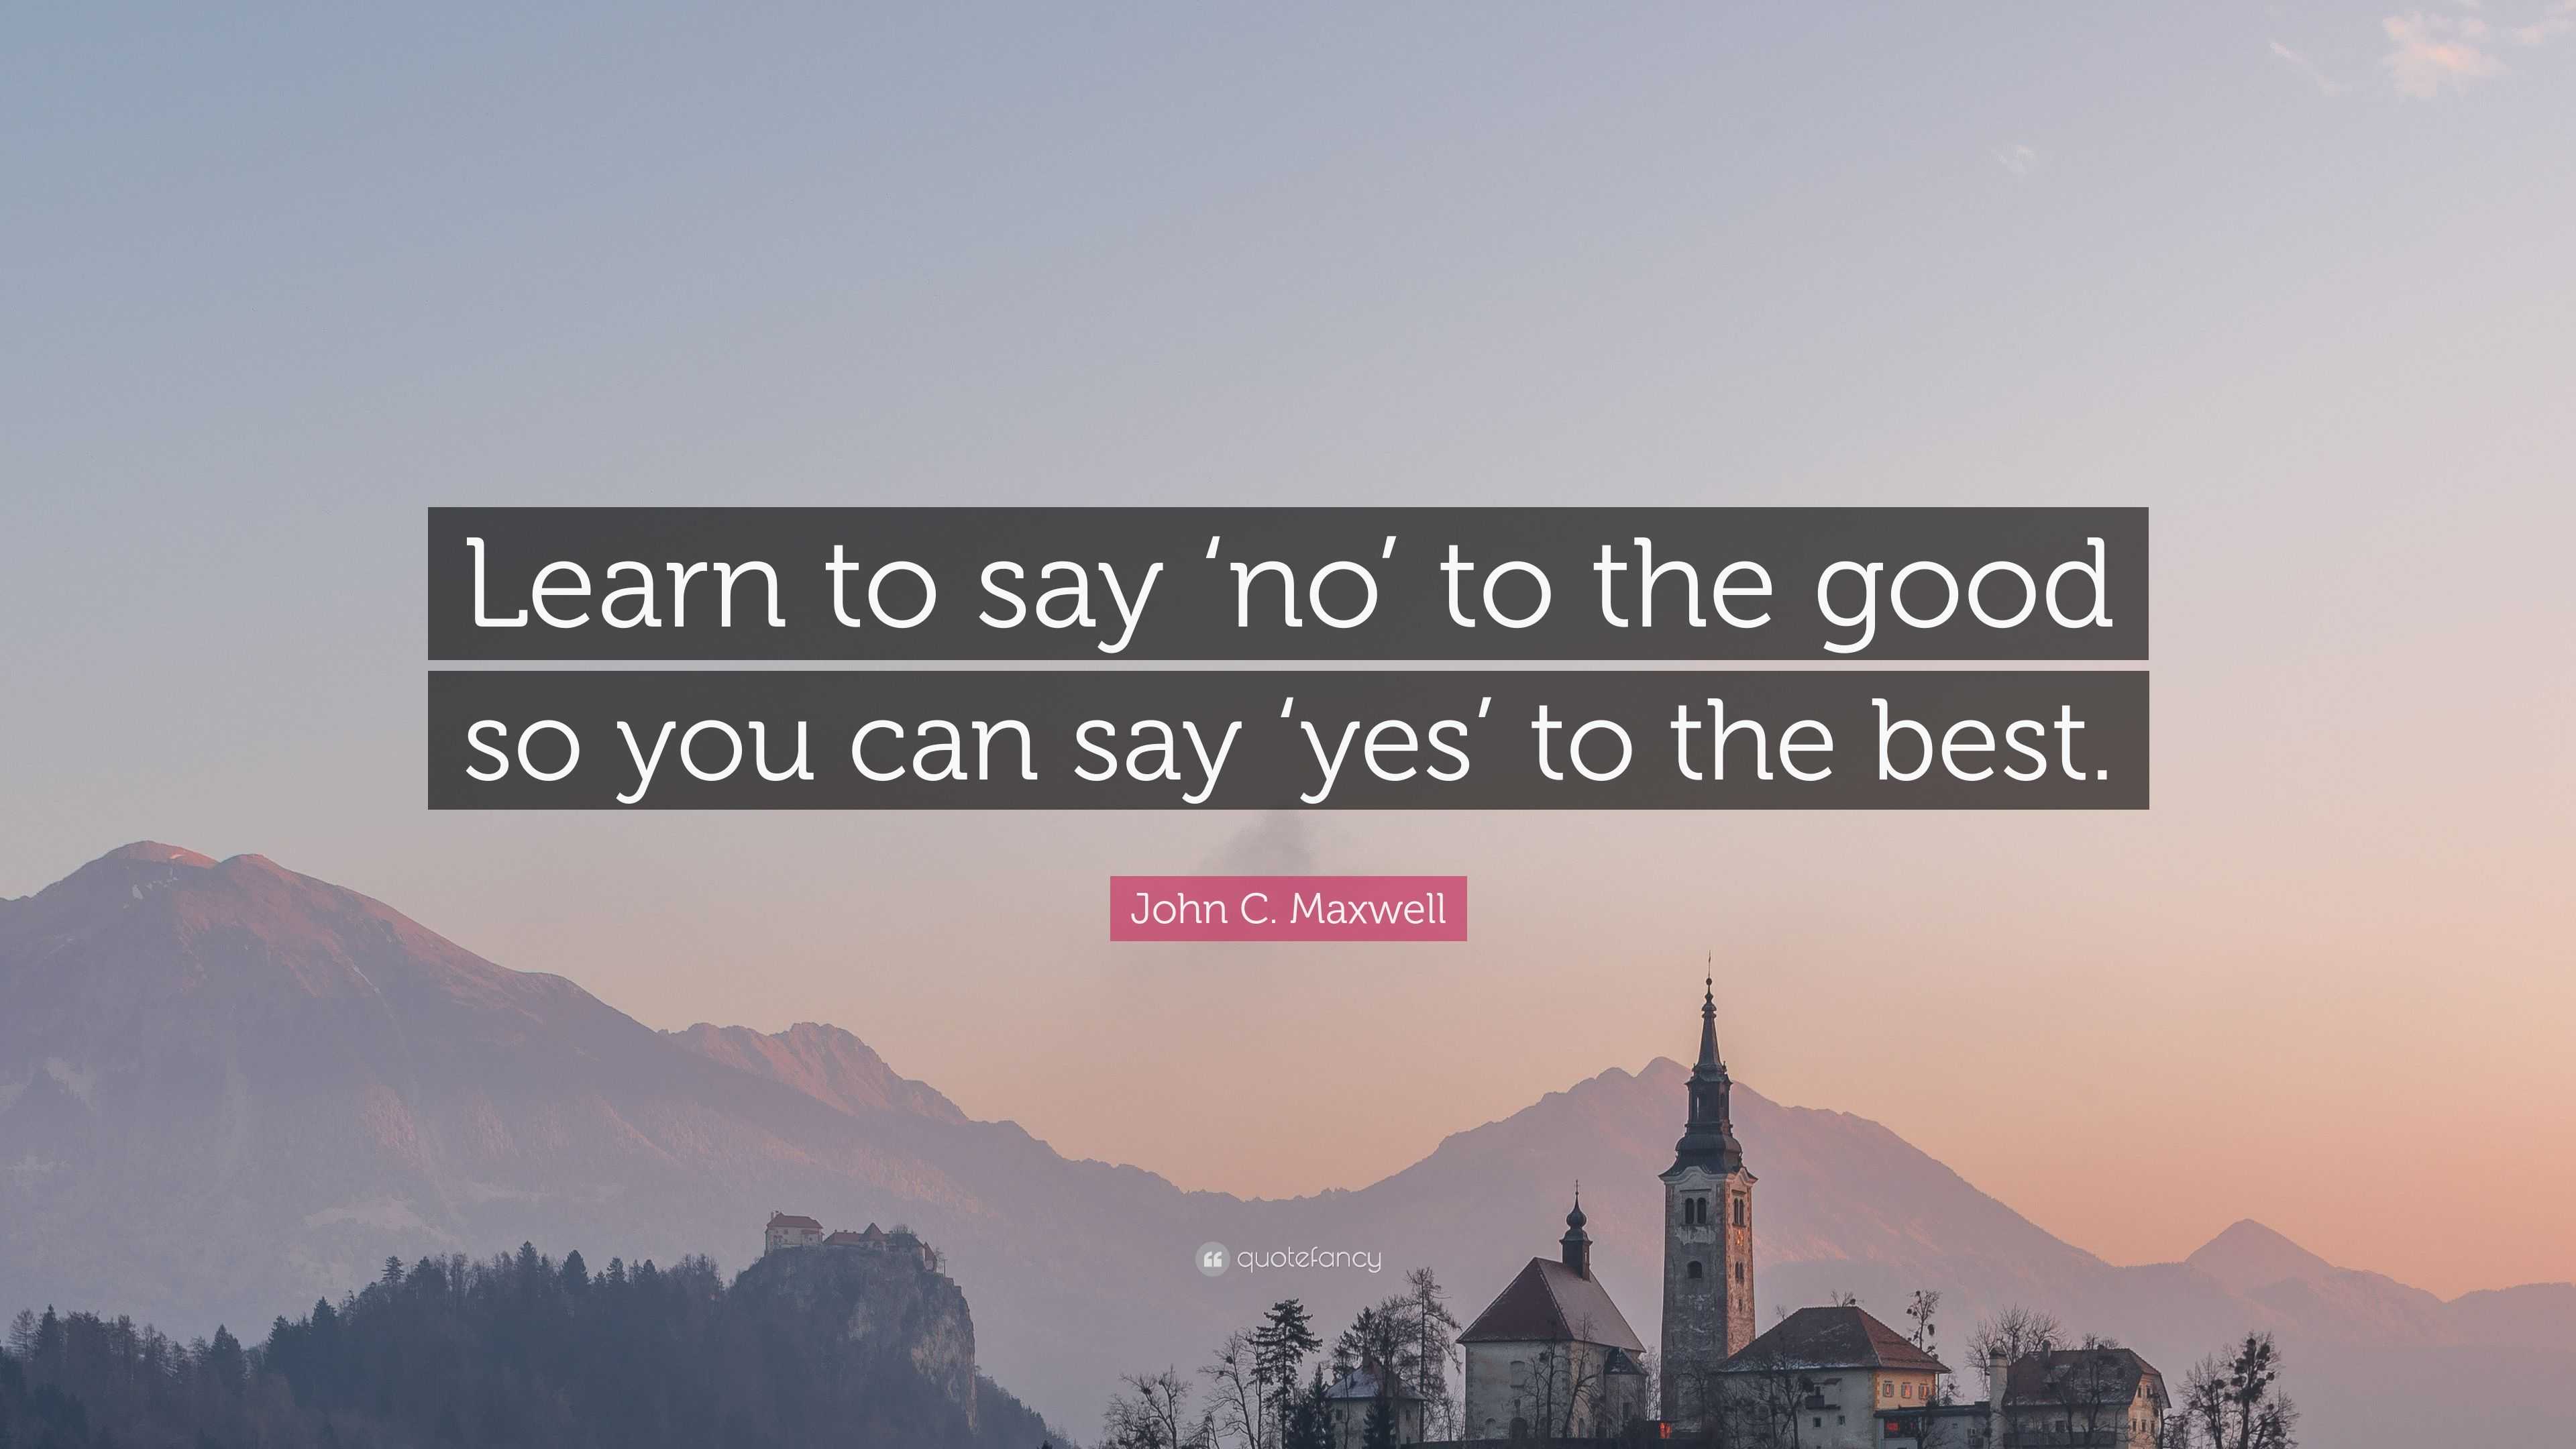 John C. Maxwell Quote: "Learn to say 'no' to the good so ...